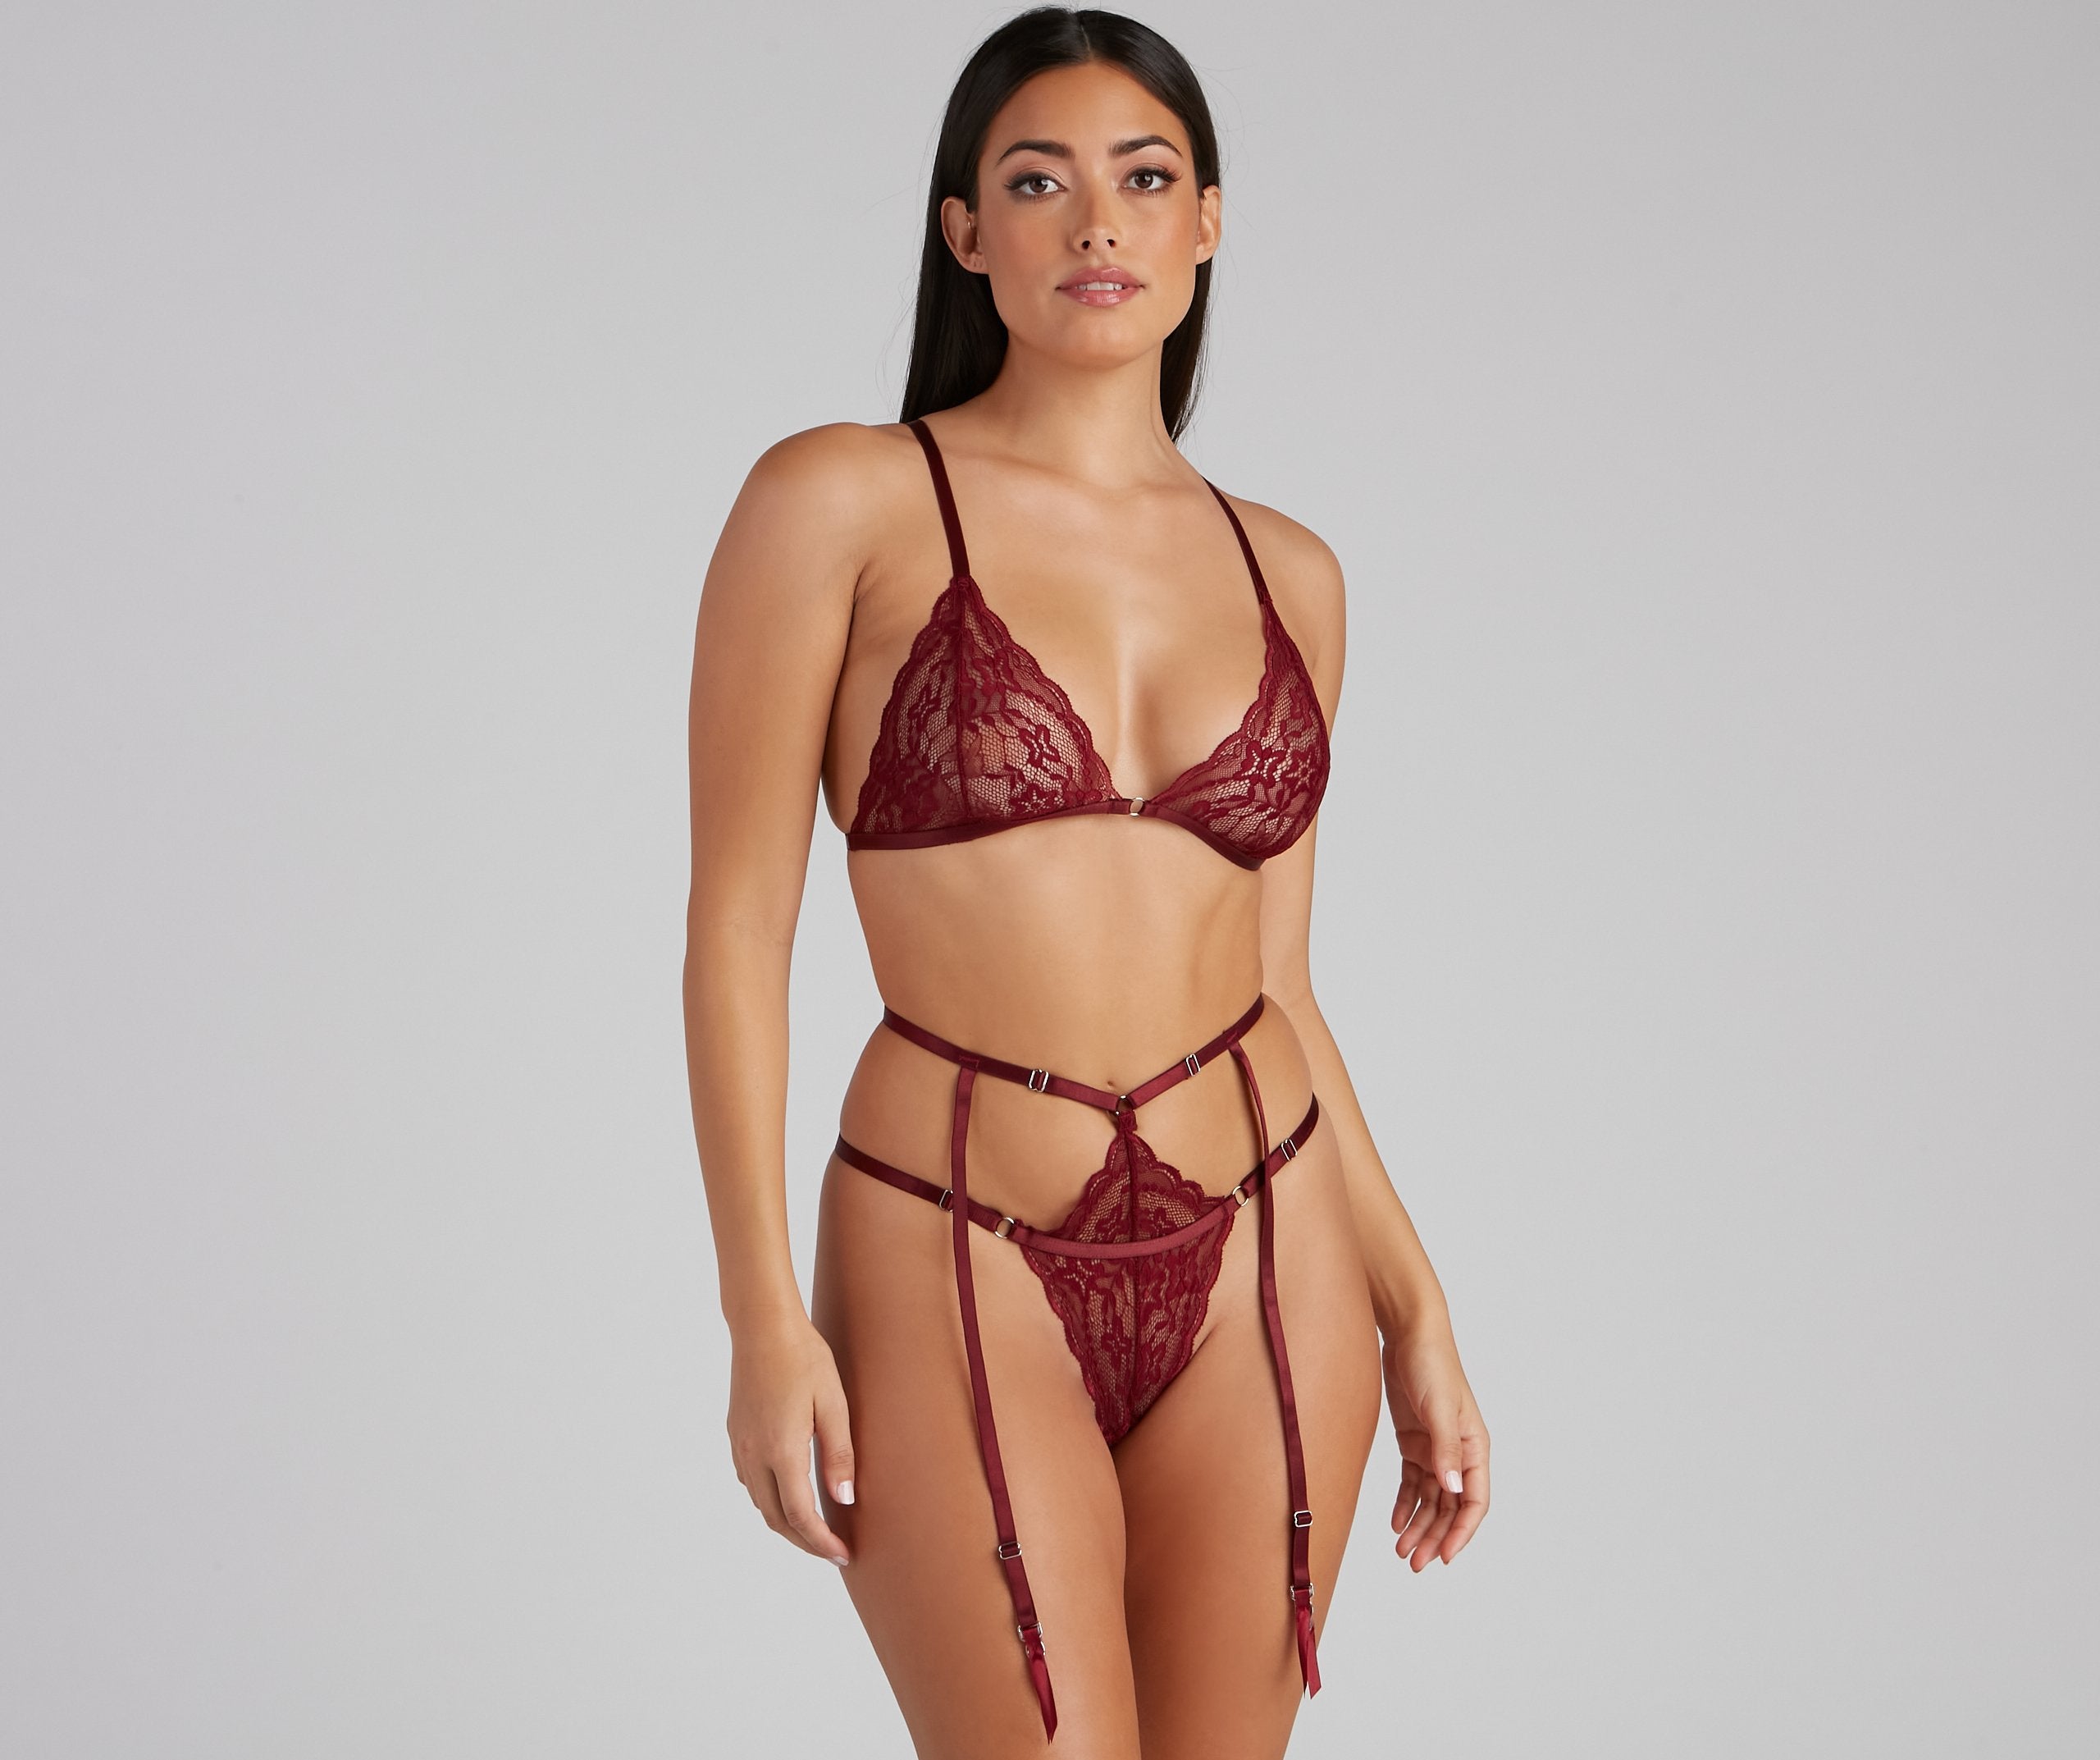 Fall For You Bra And Panty Set - Lady Occasions